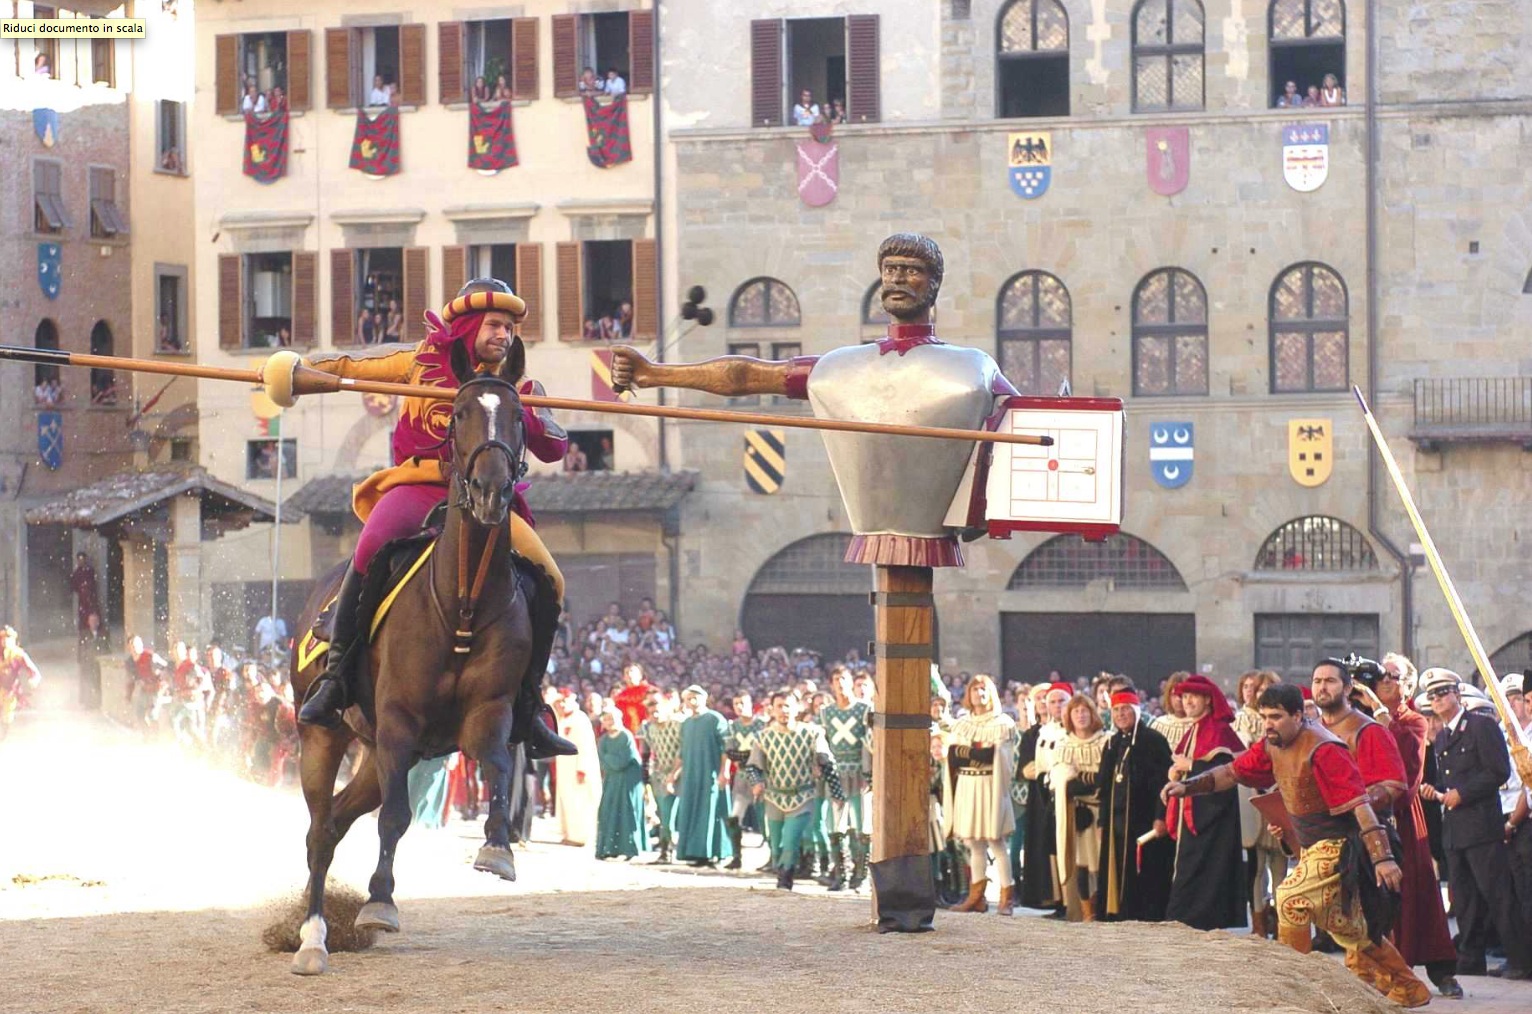 The charge of the Porta del Foro knight 